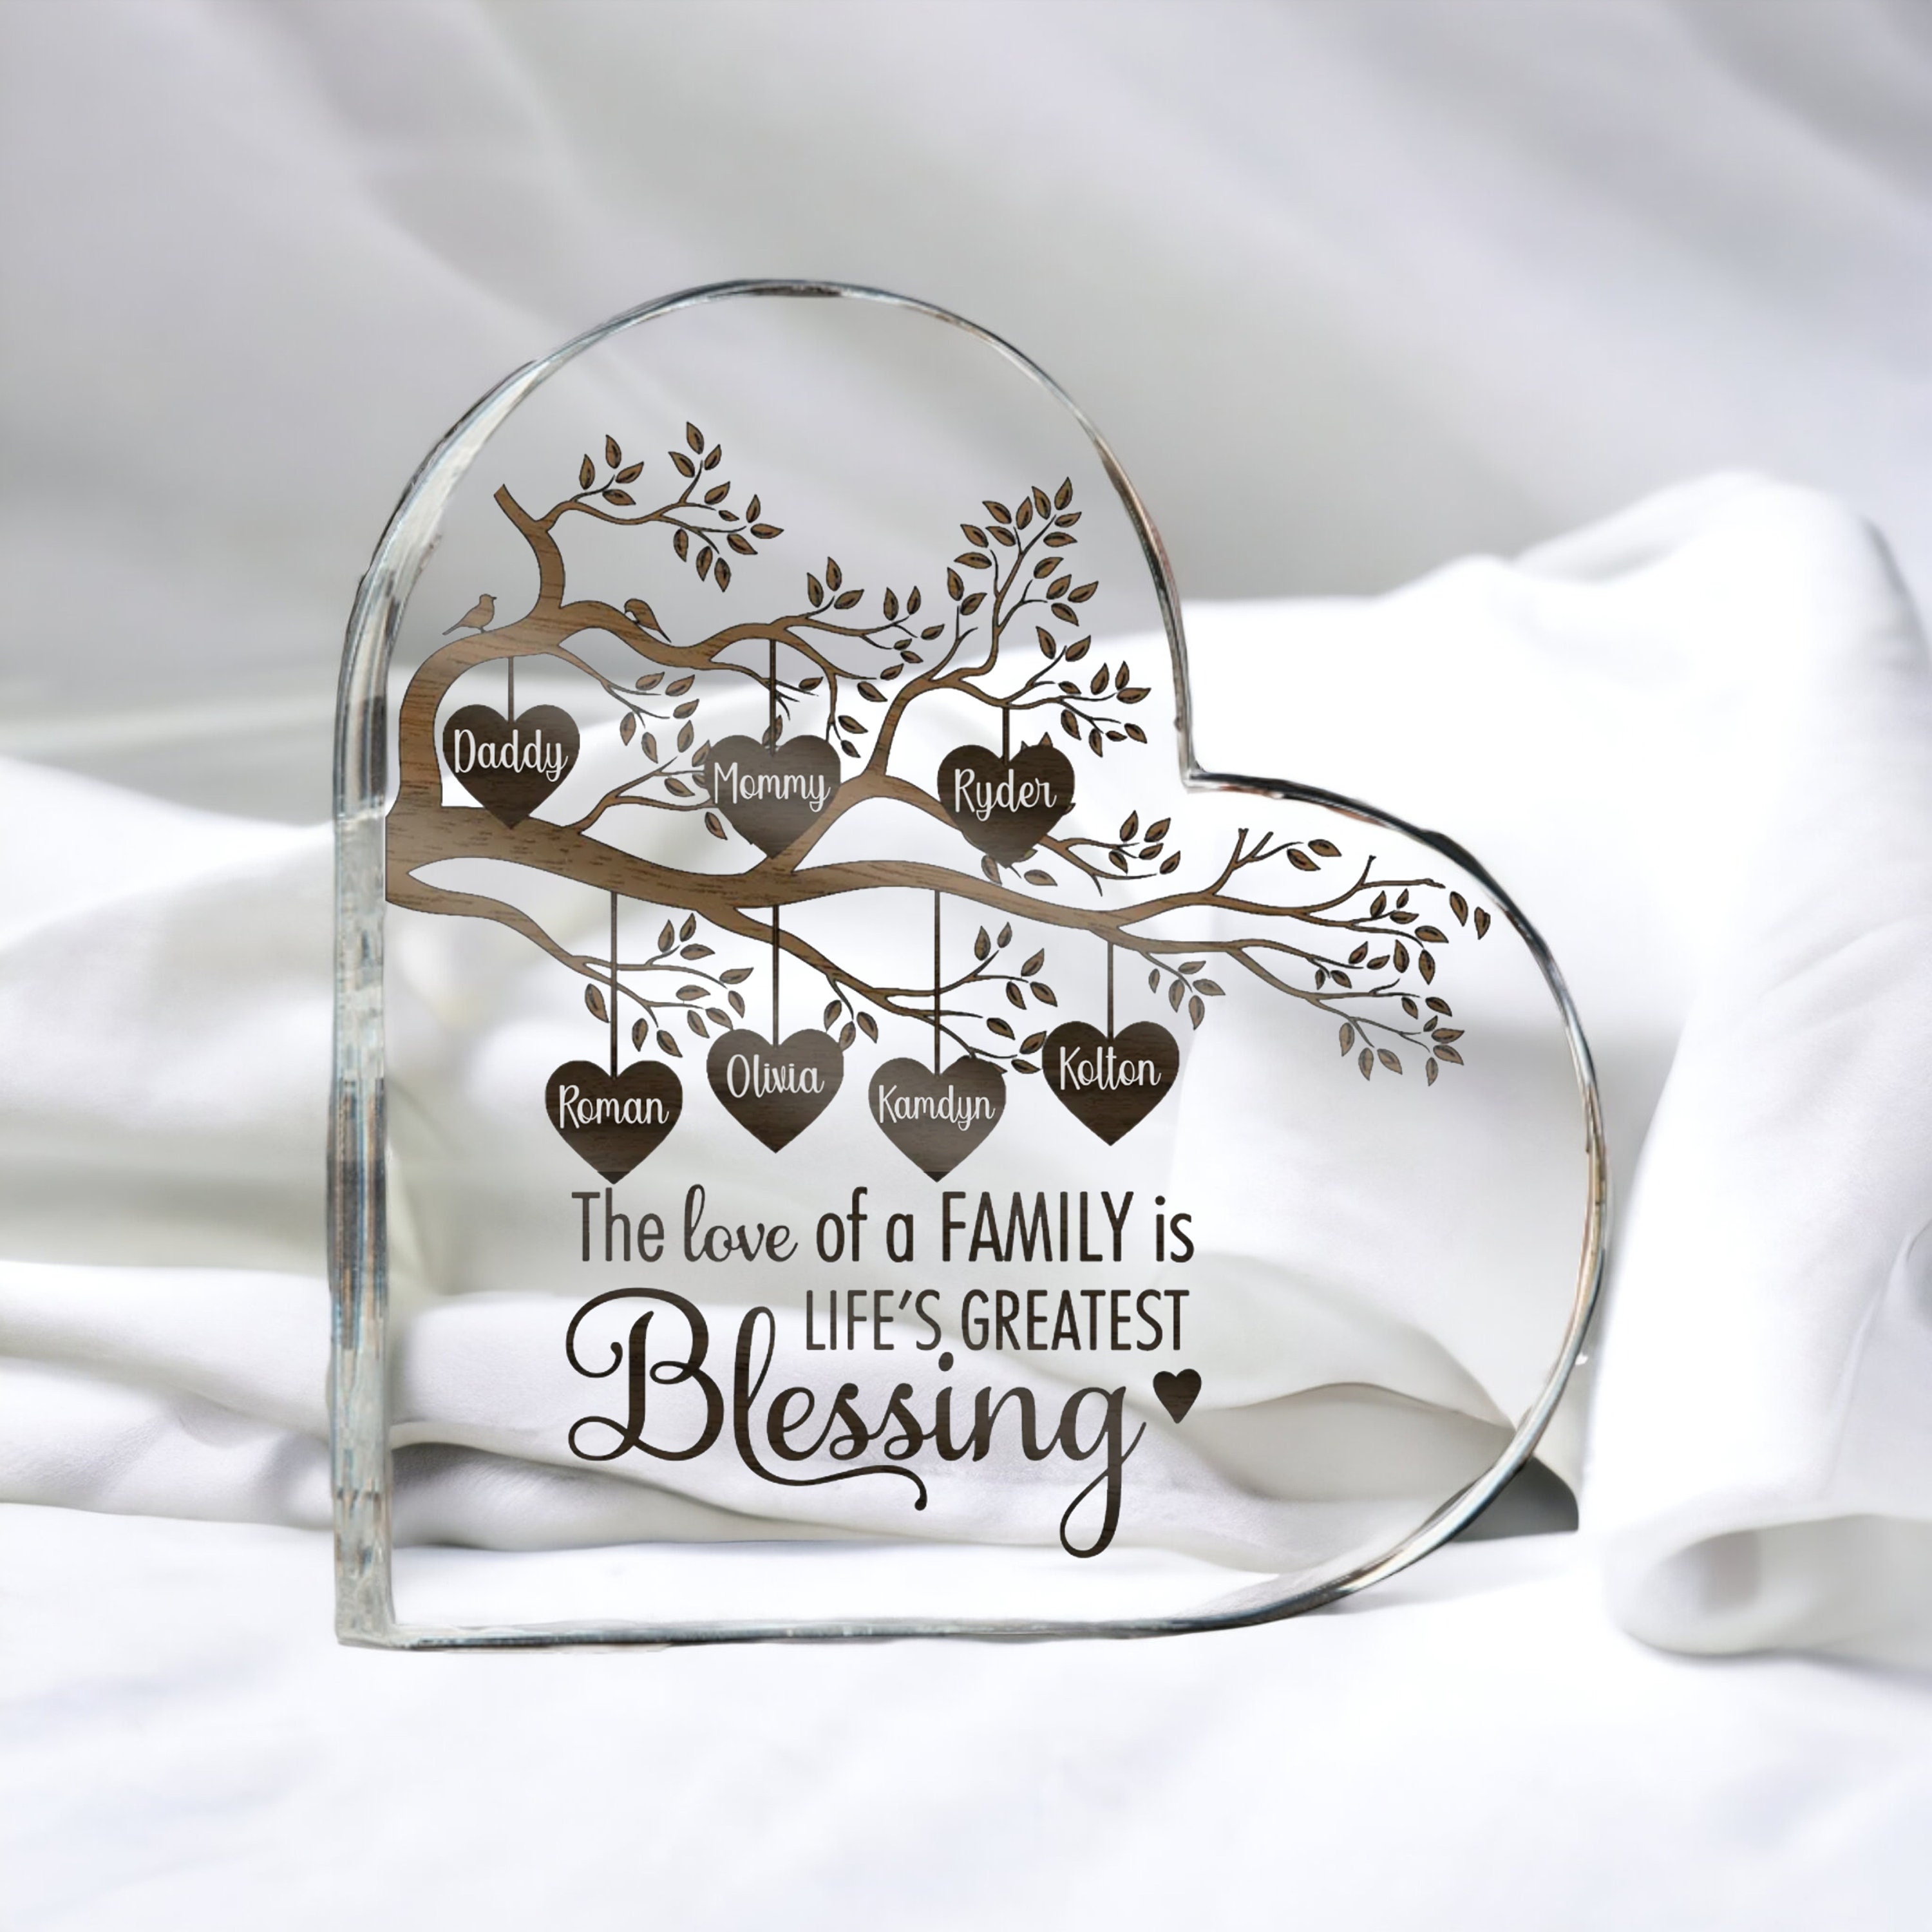 Acrylic Plaque, Heart-shaped, Gifts For Parents For Dad And Mom